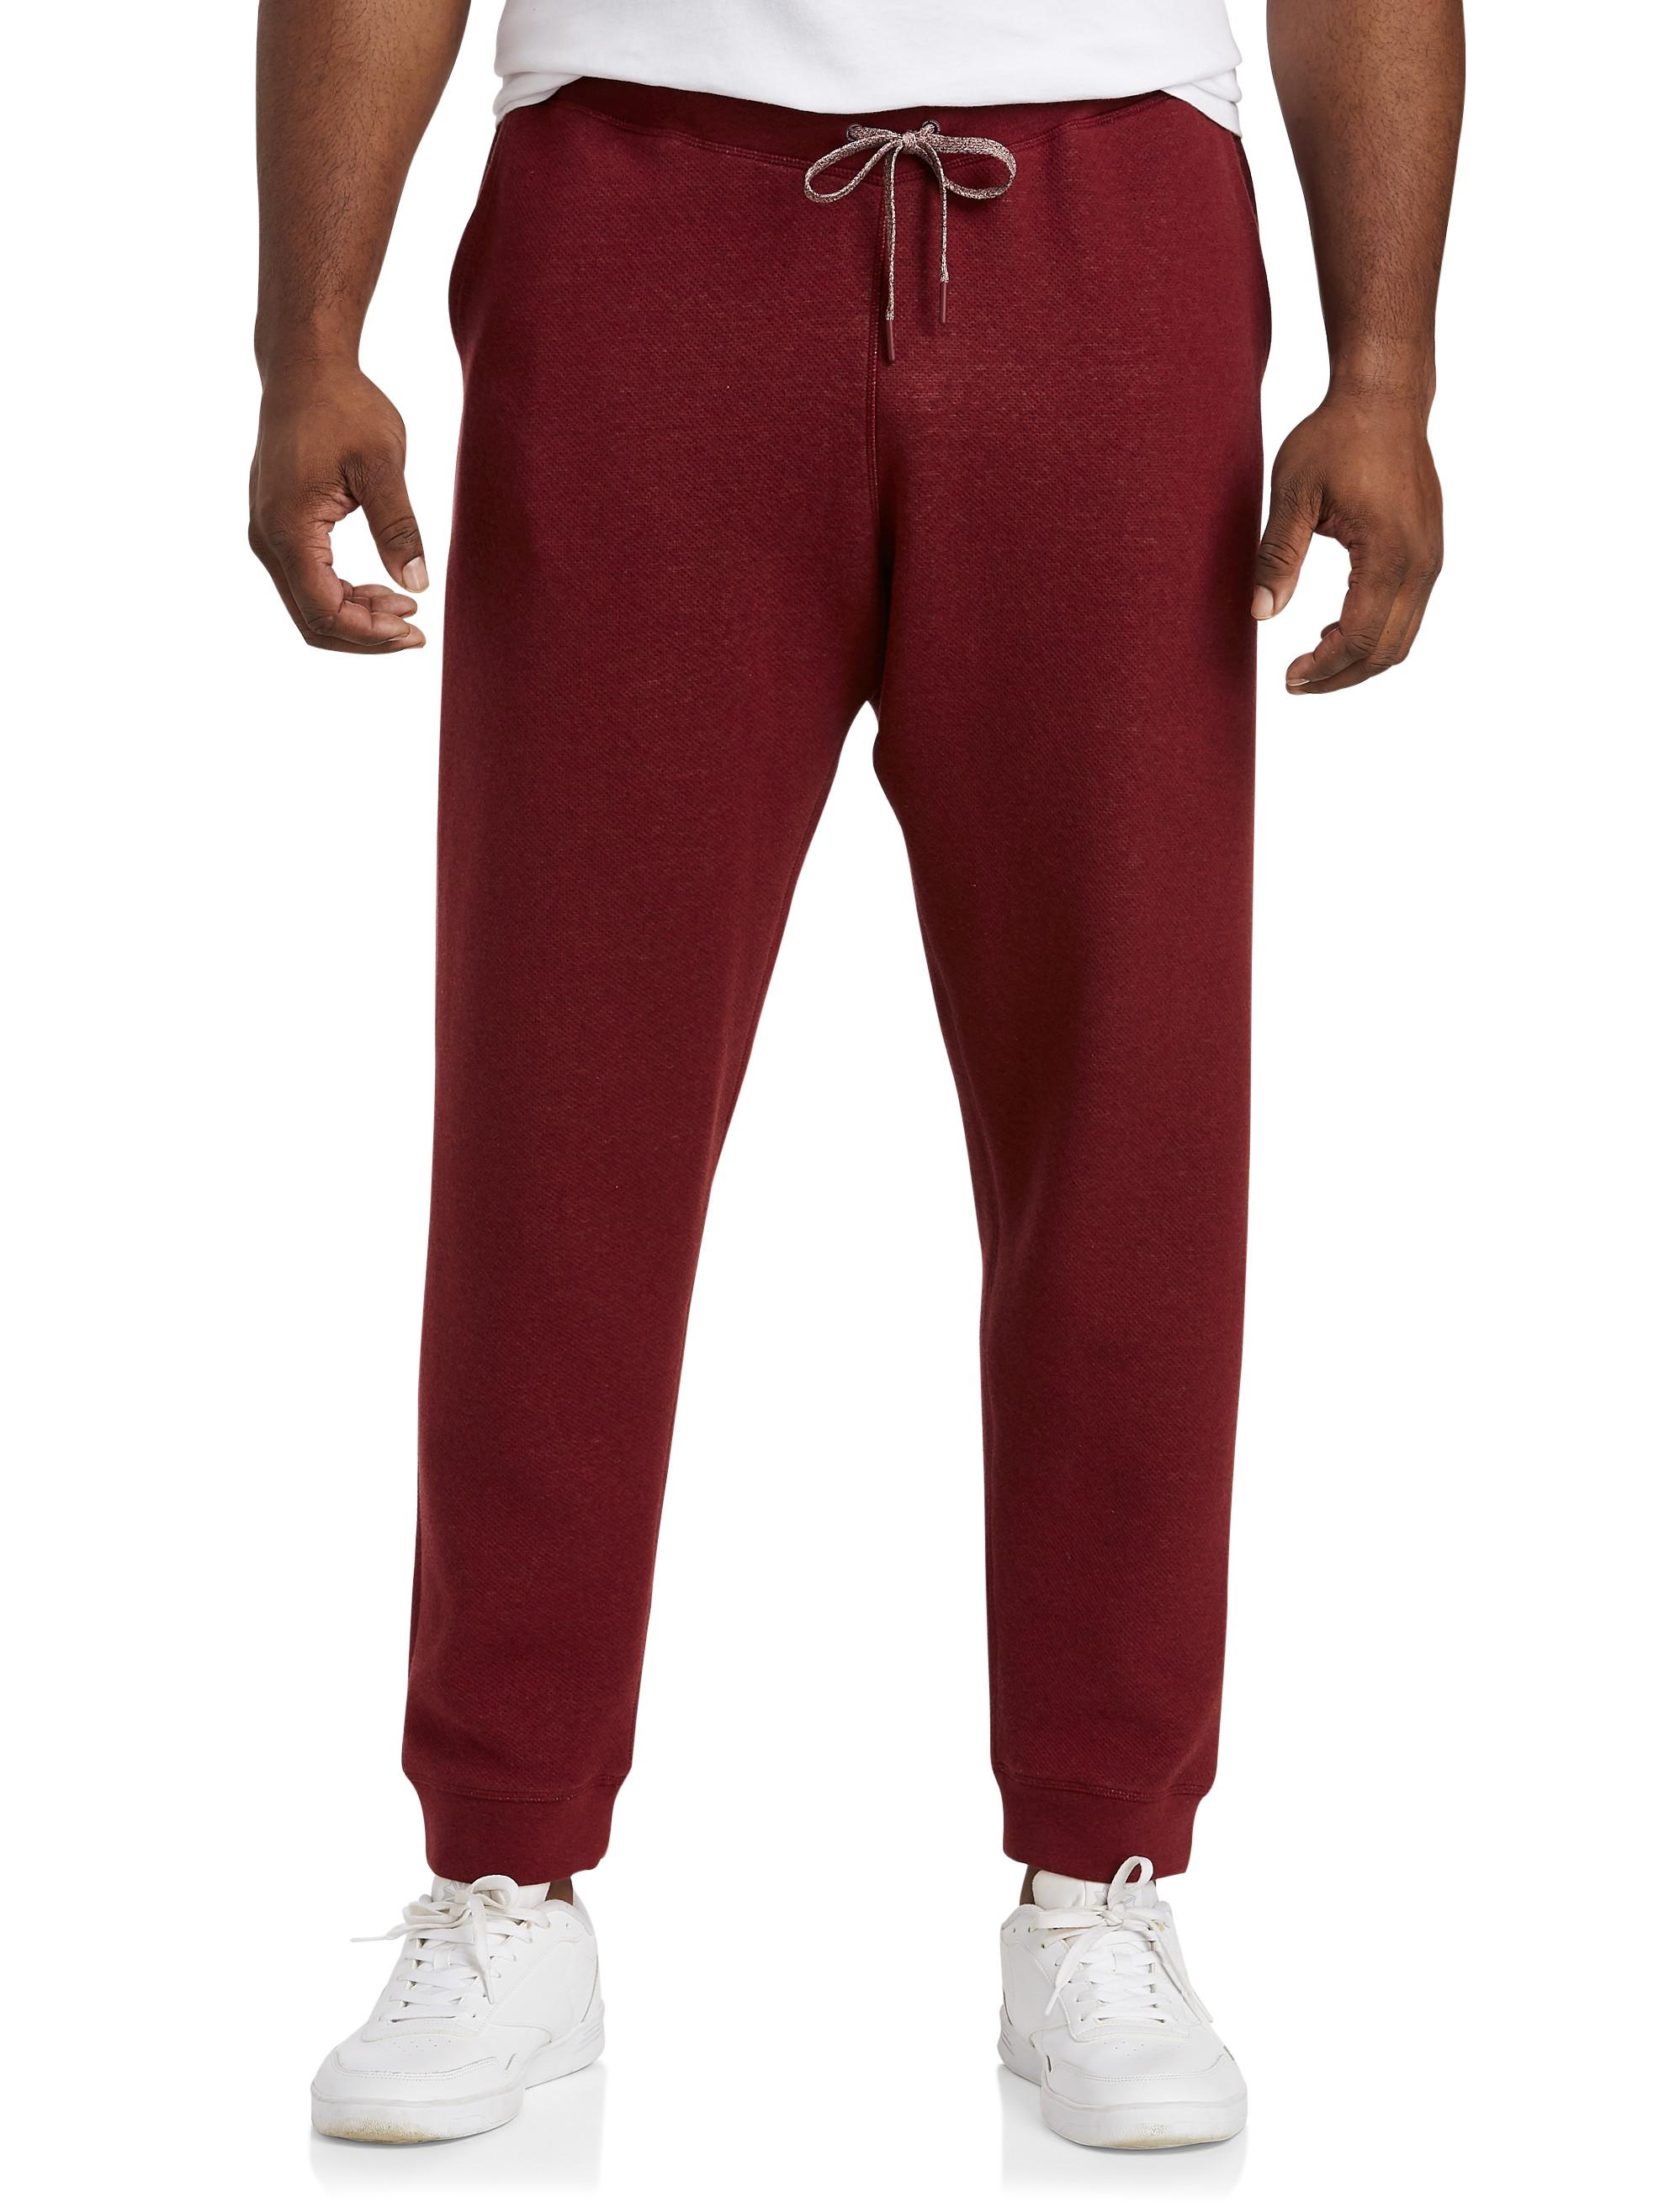 Vineyard Vines Big & Tall Saltwater Joggers in Red for Men